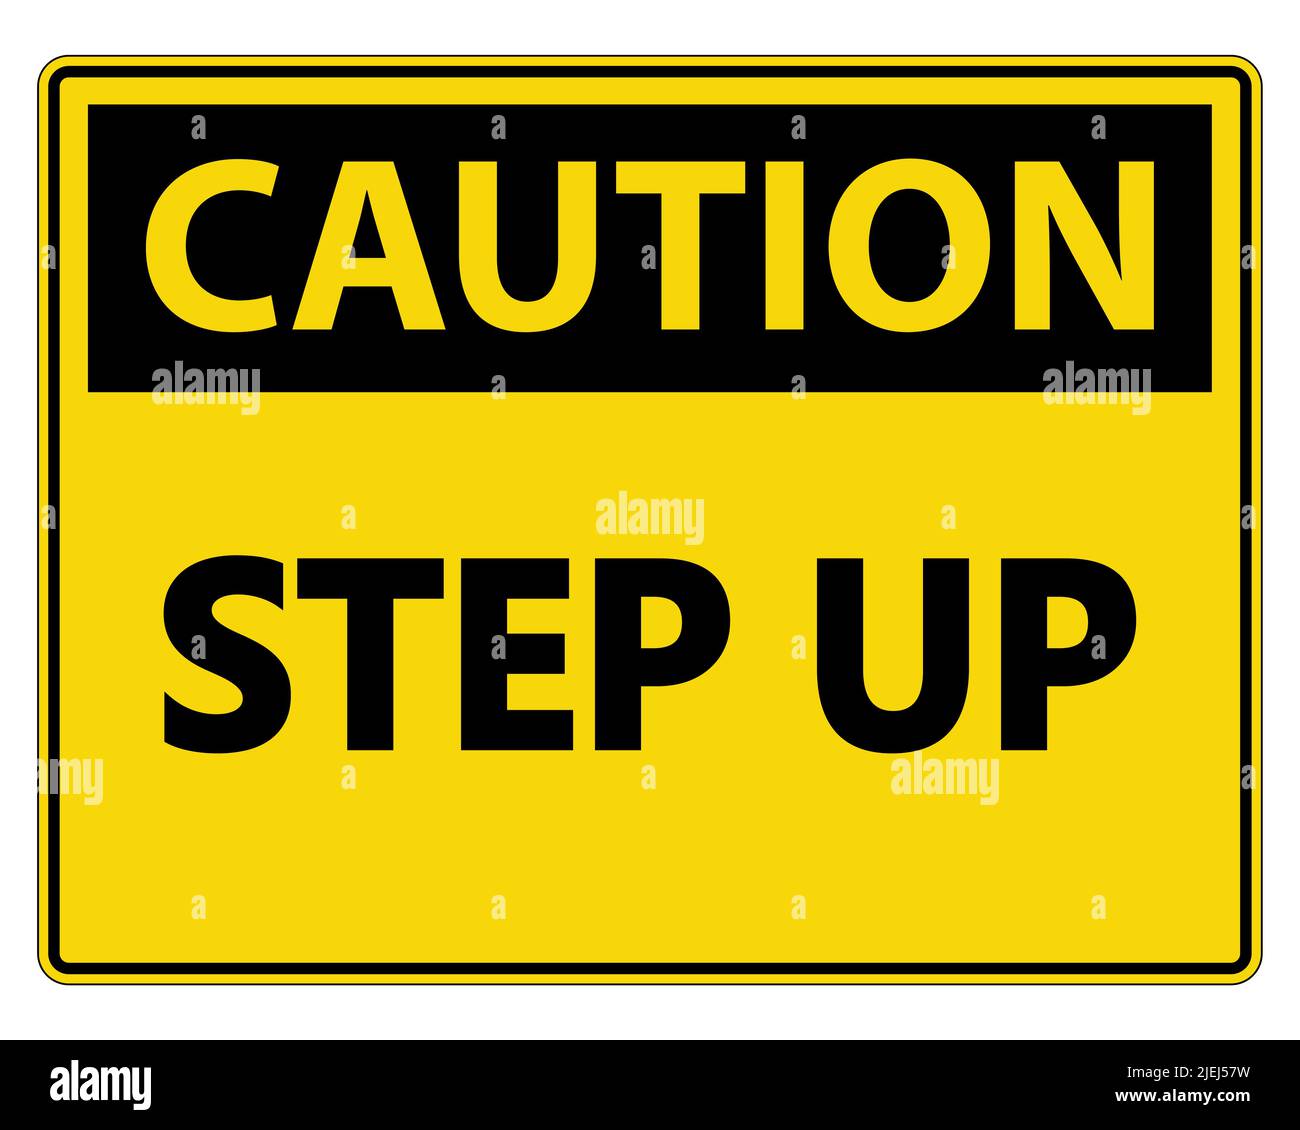 Caution Step Up Wall Sign on white background,vector illustration Stock Vector